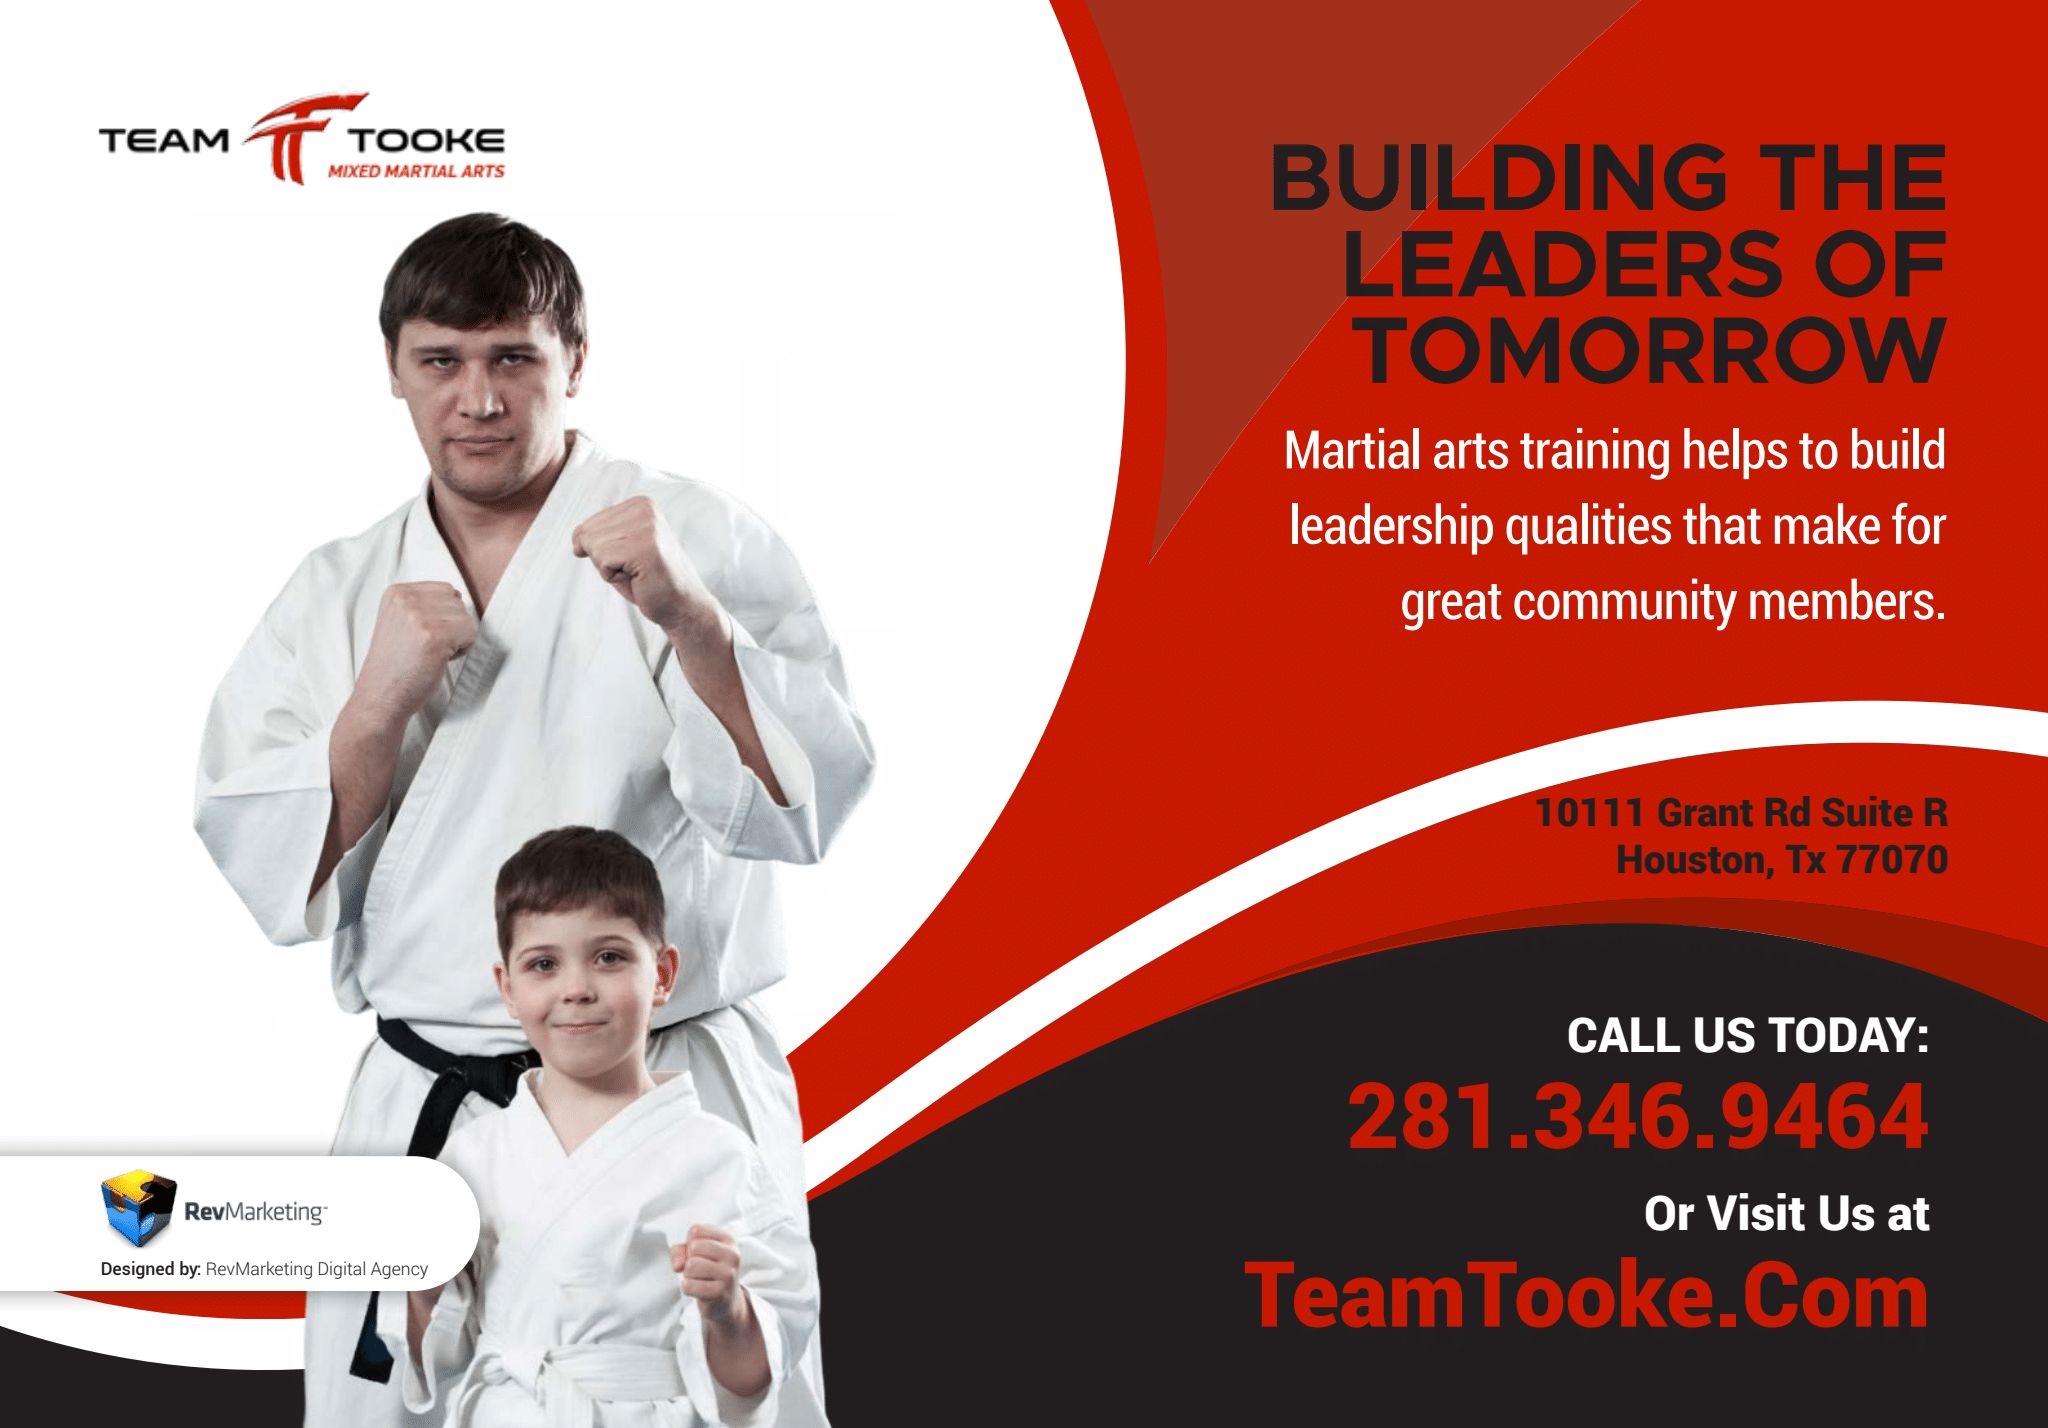 Building the Leaders of Tomorrow through Martial Arts